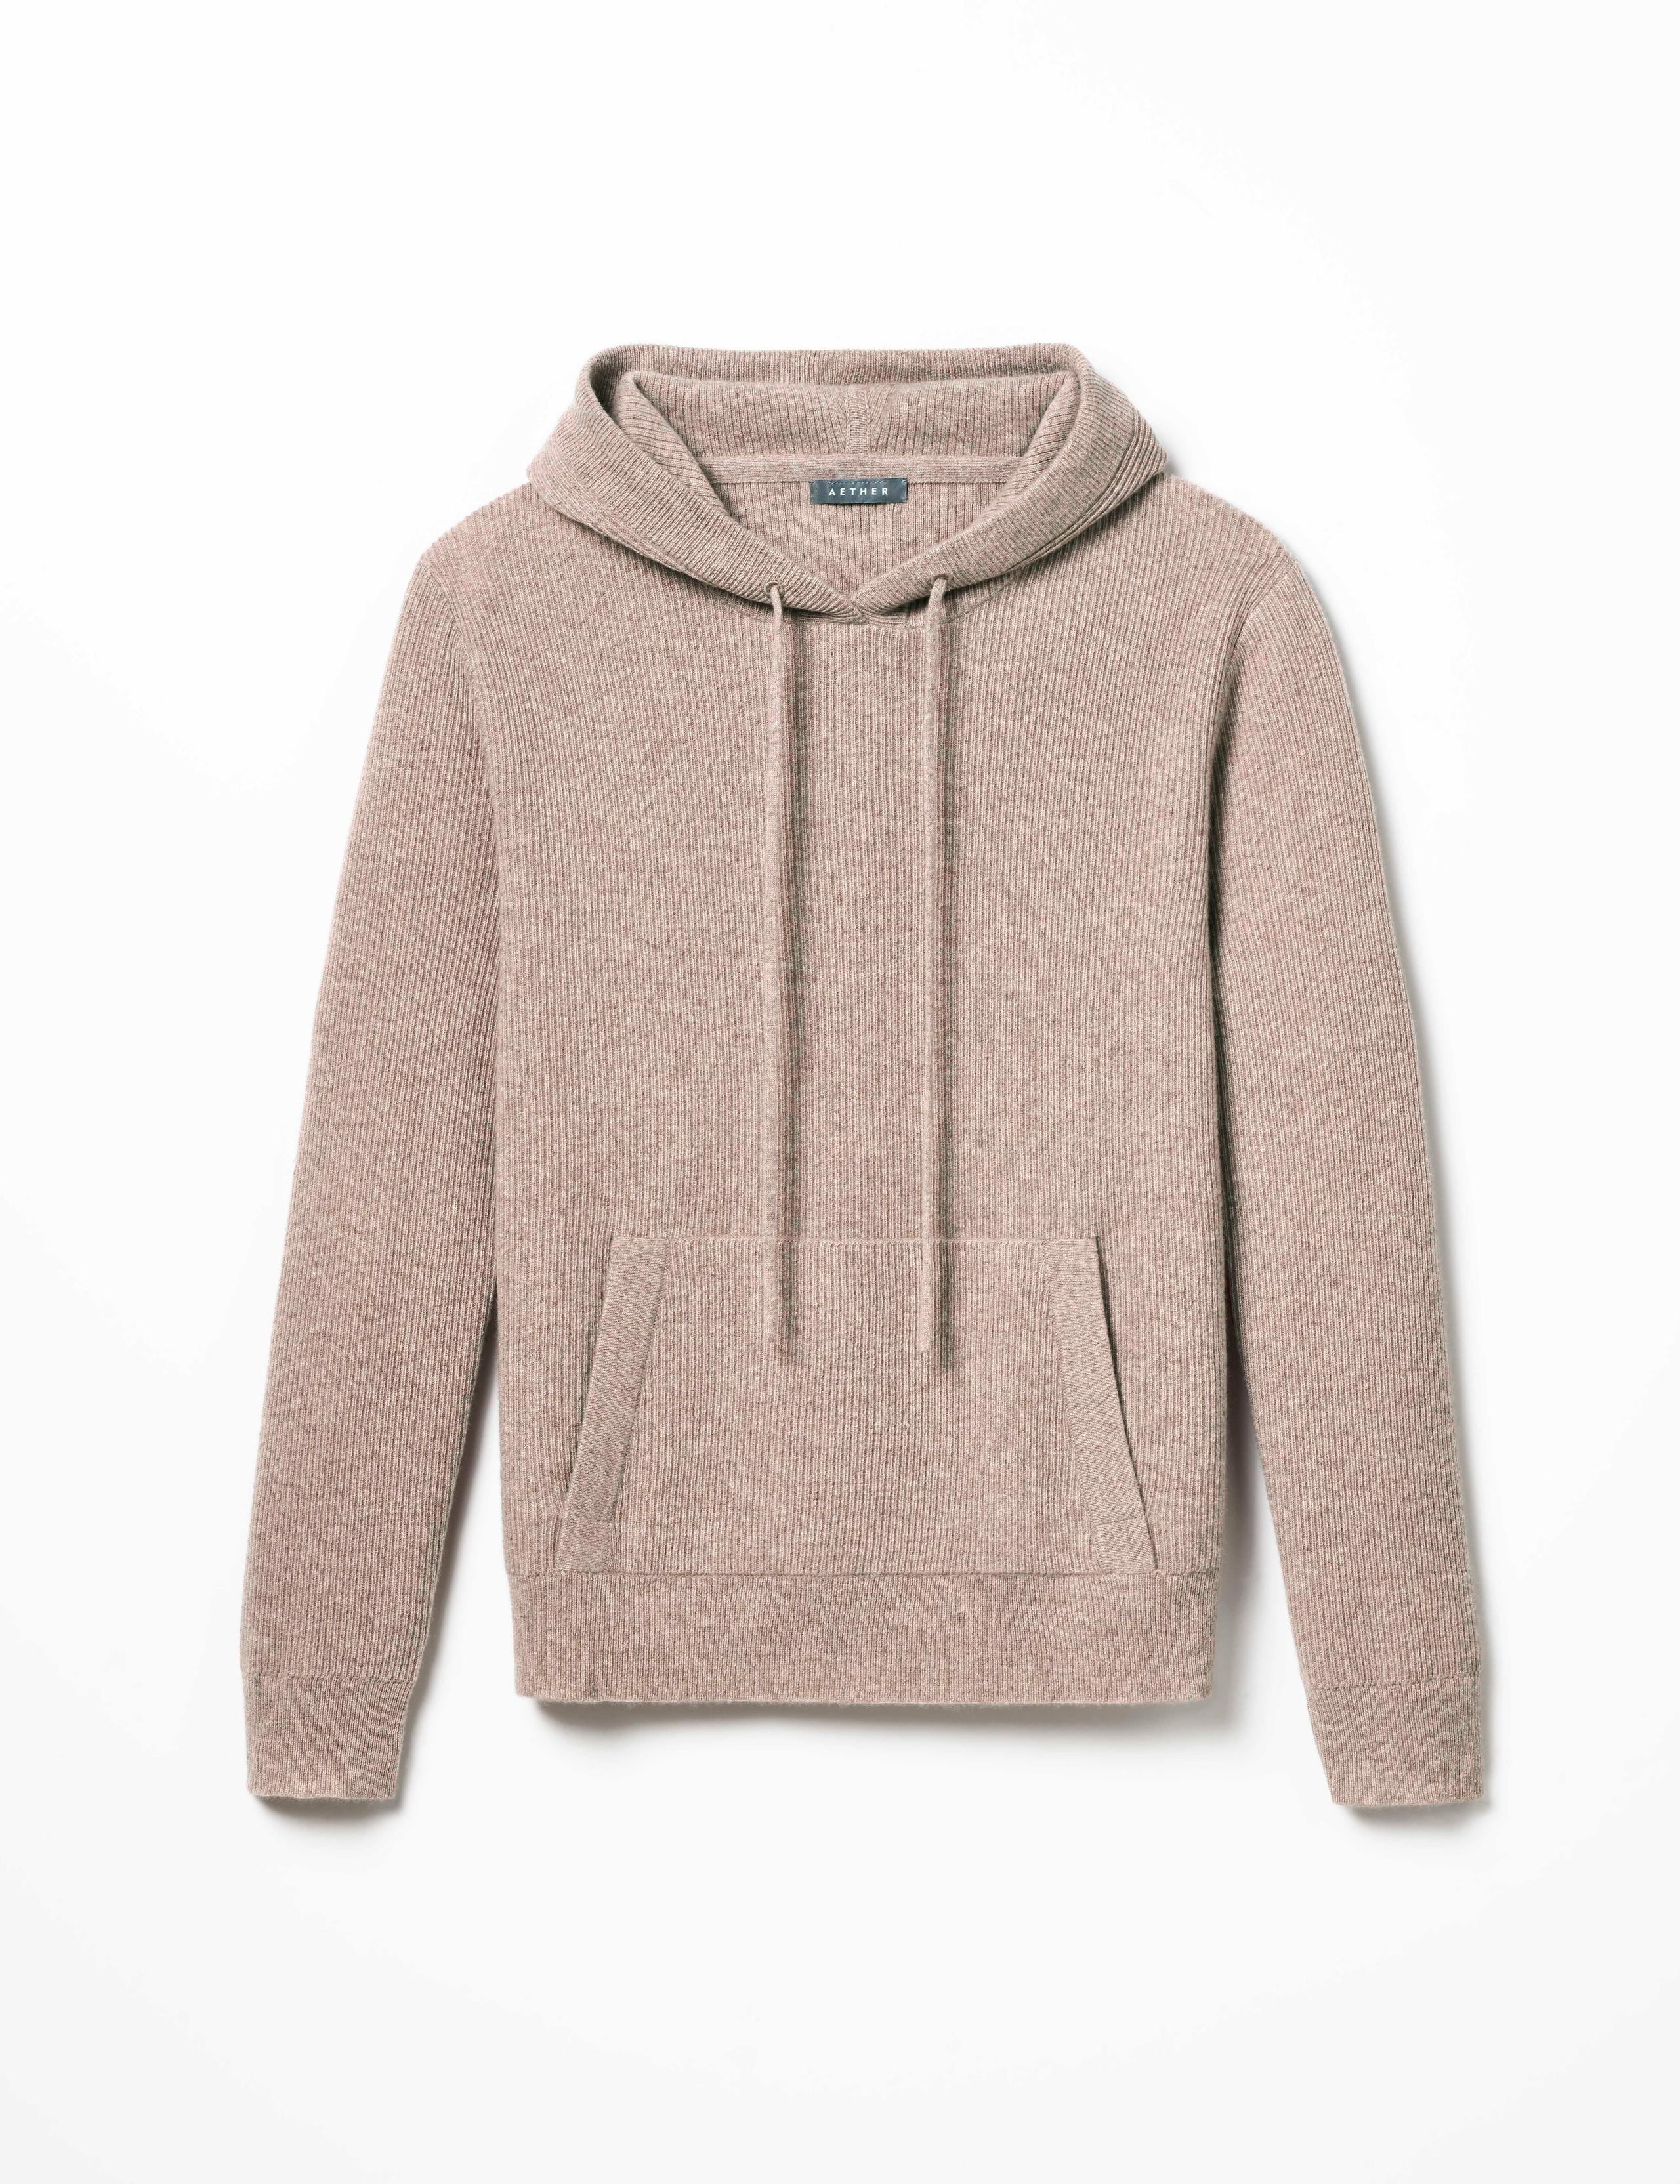 Studio laydown of Lawrence Cashmere Hooded Sweater